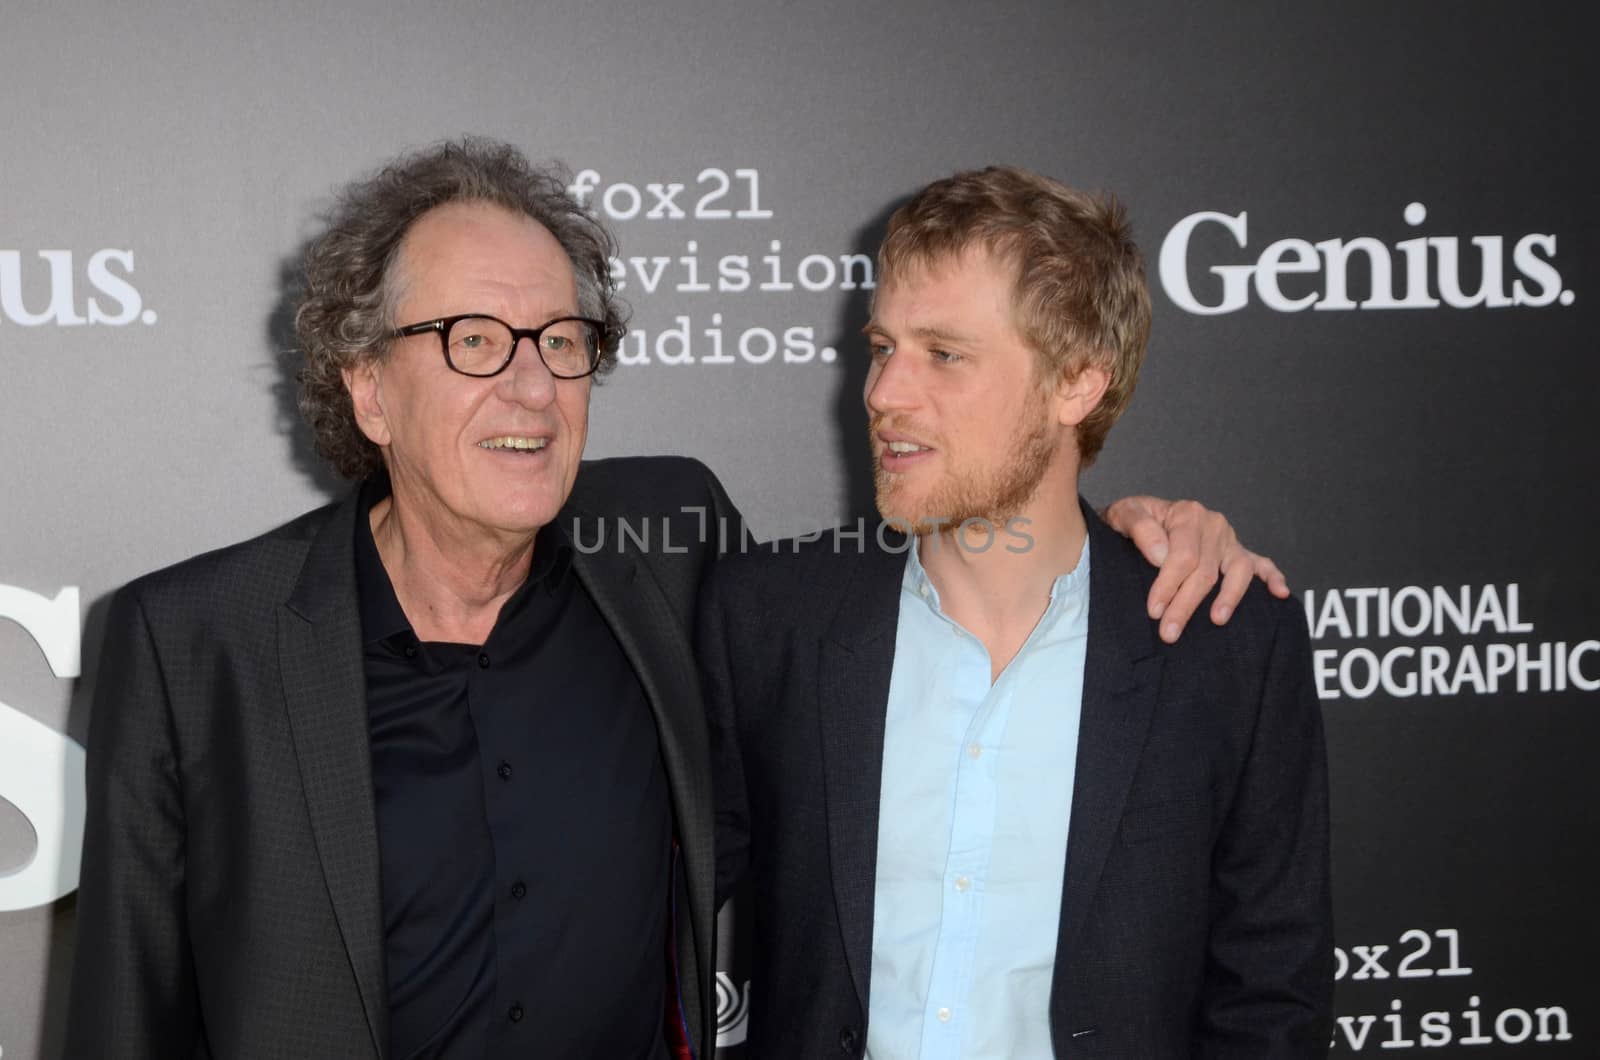 Geoffrey Rush, Johnny Flynn at the "Genius" Los Angeles Premiere, Village Theater, Westwood, CA 04-24-17/ImageCollect by ImageCollect